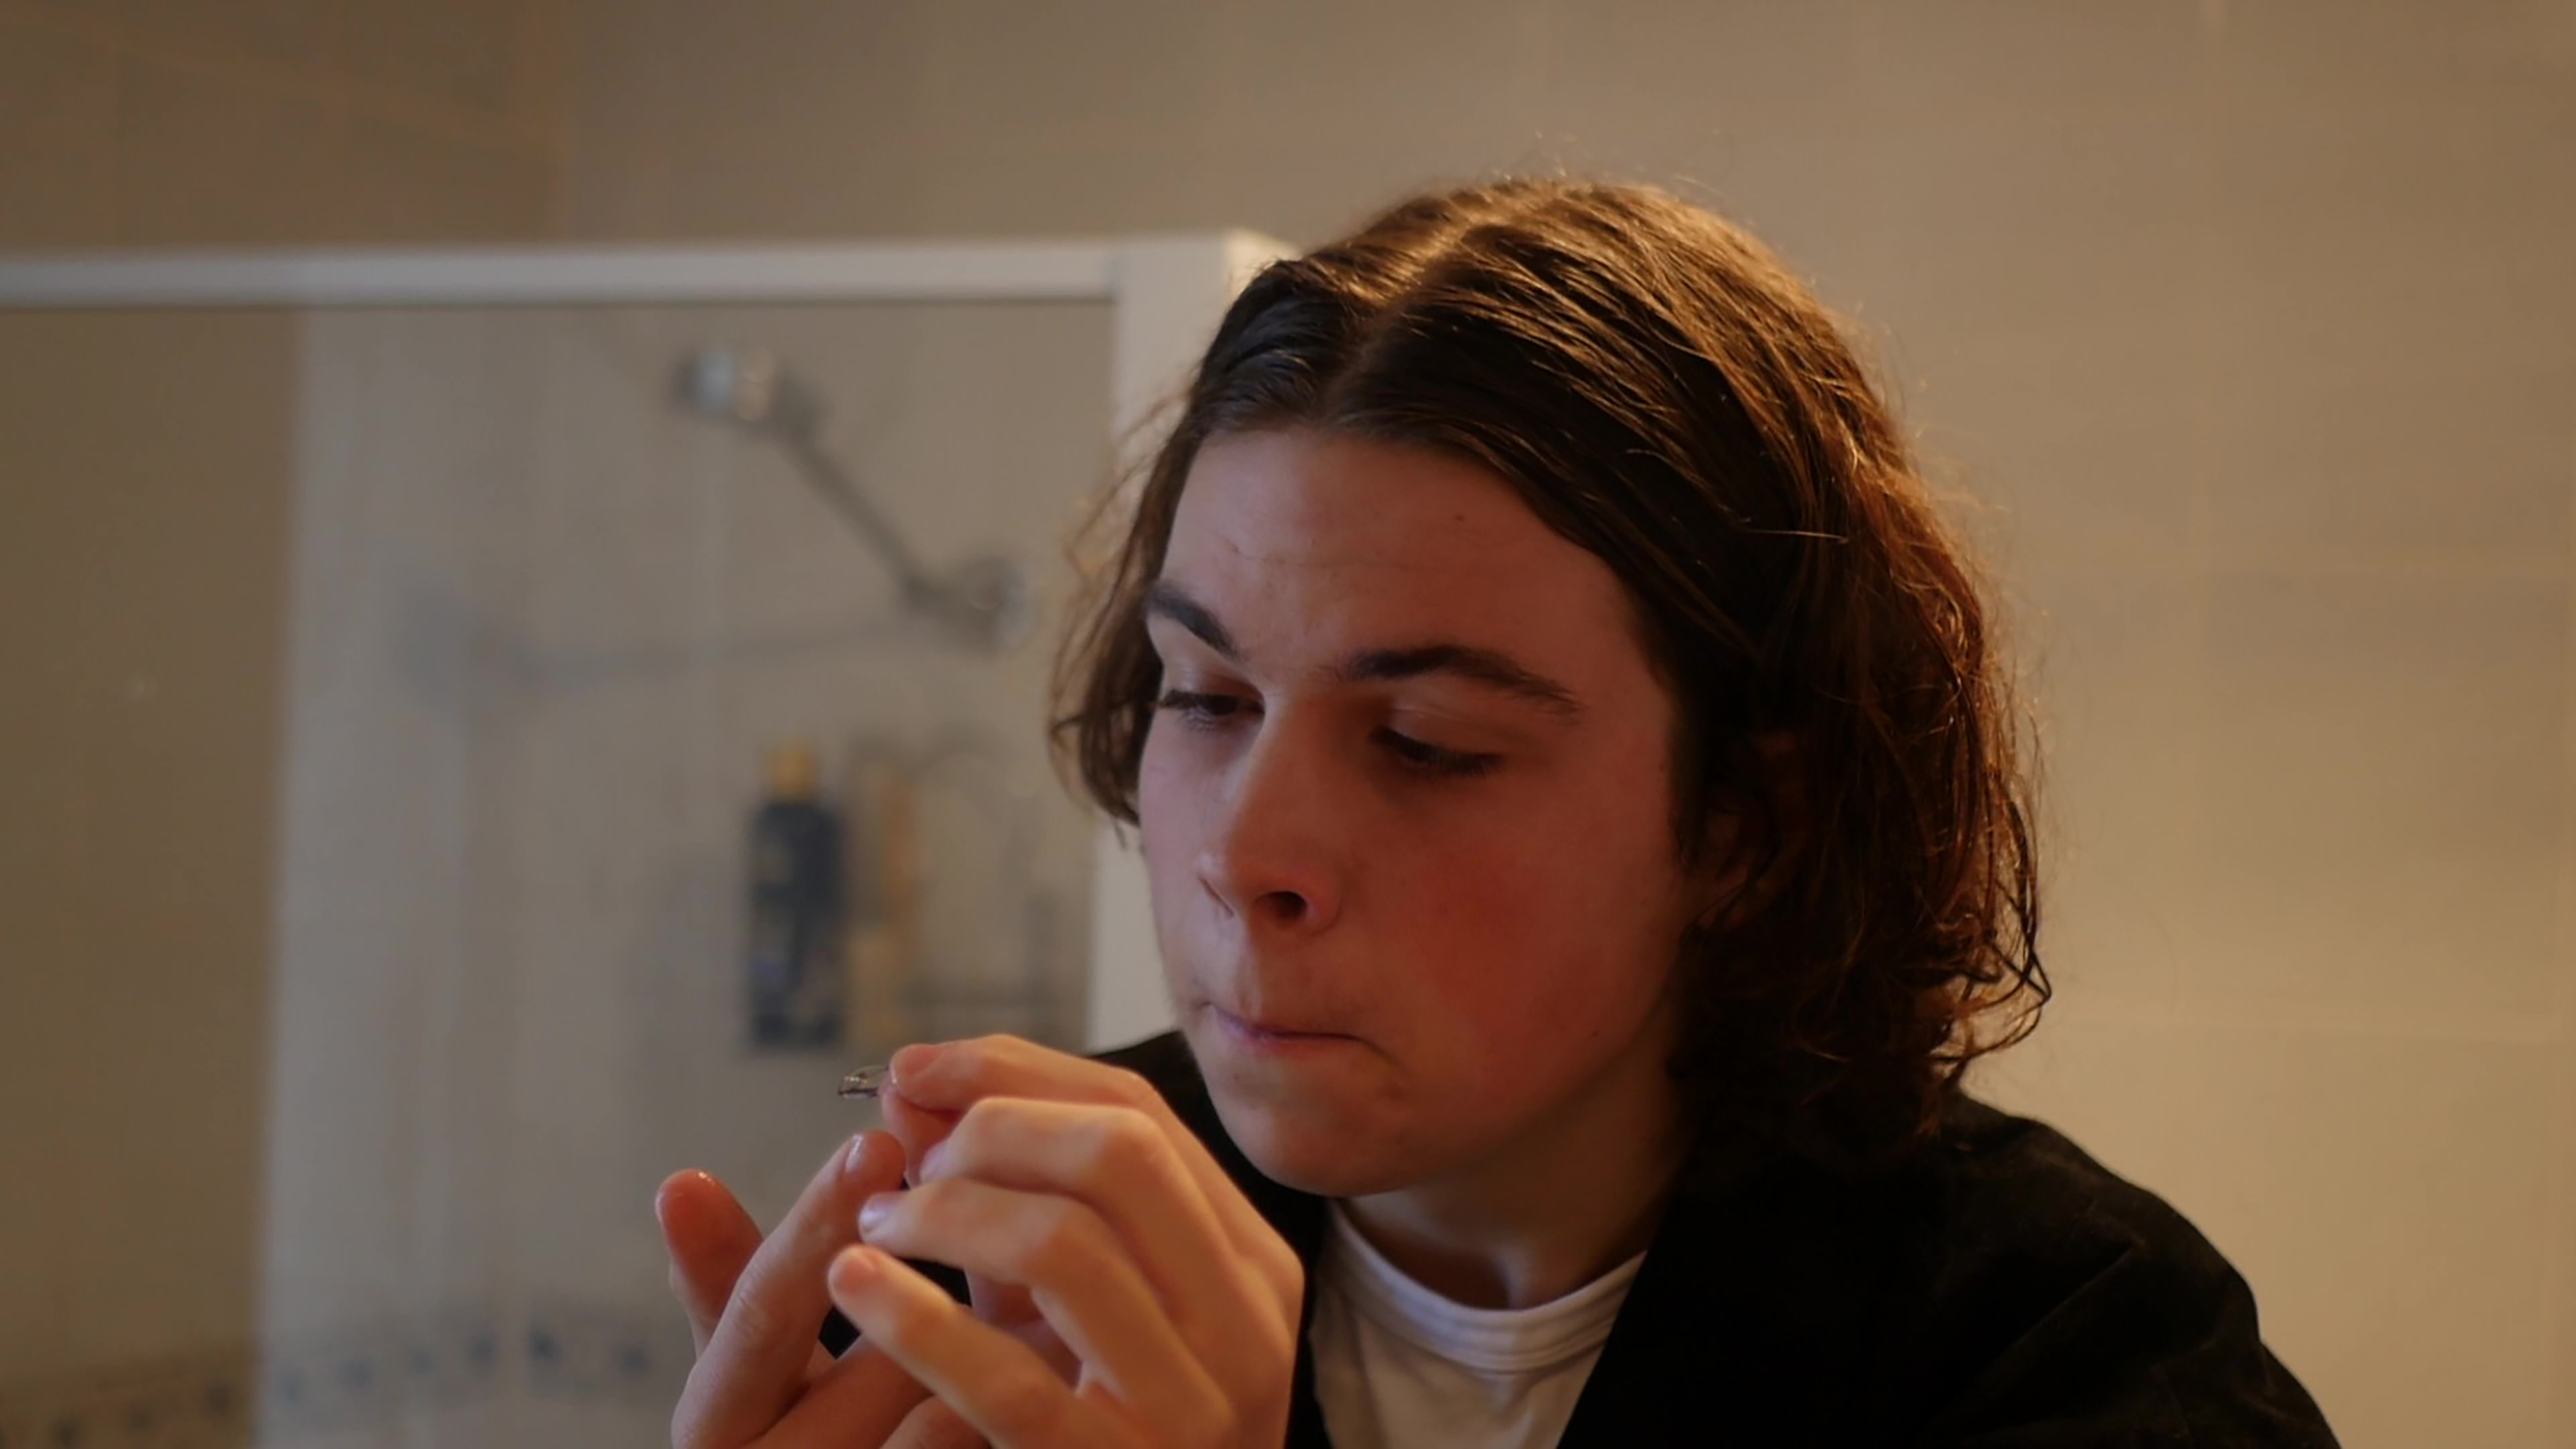 A film still showing a teenage boy with shoulder length hair looking pensive.